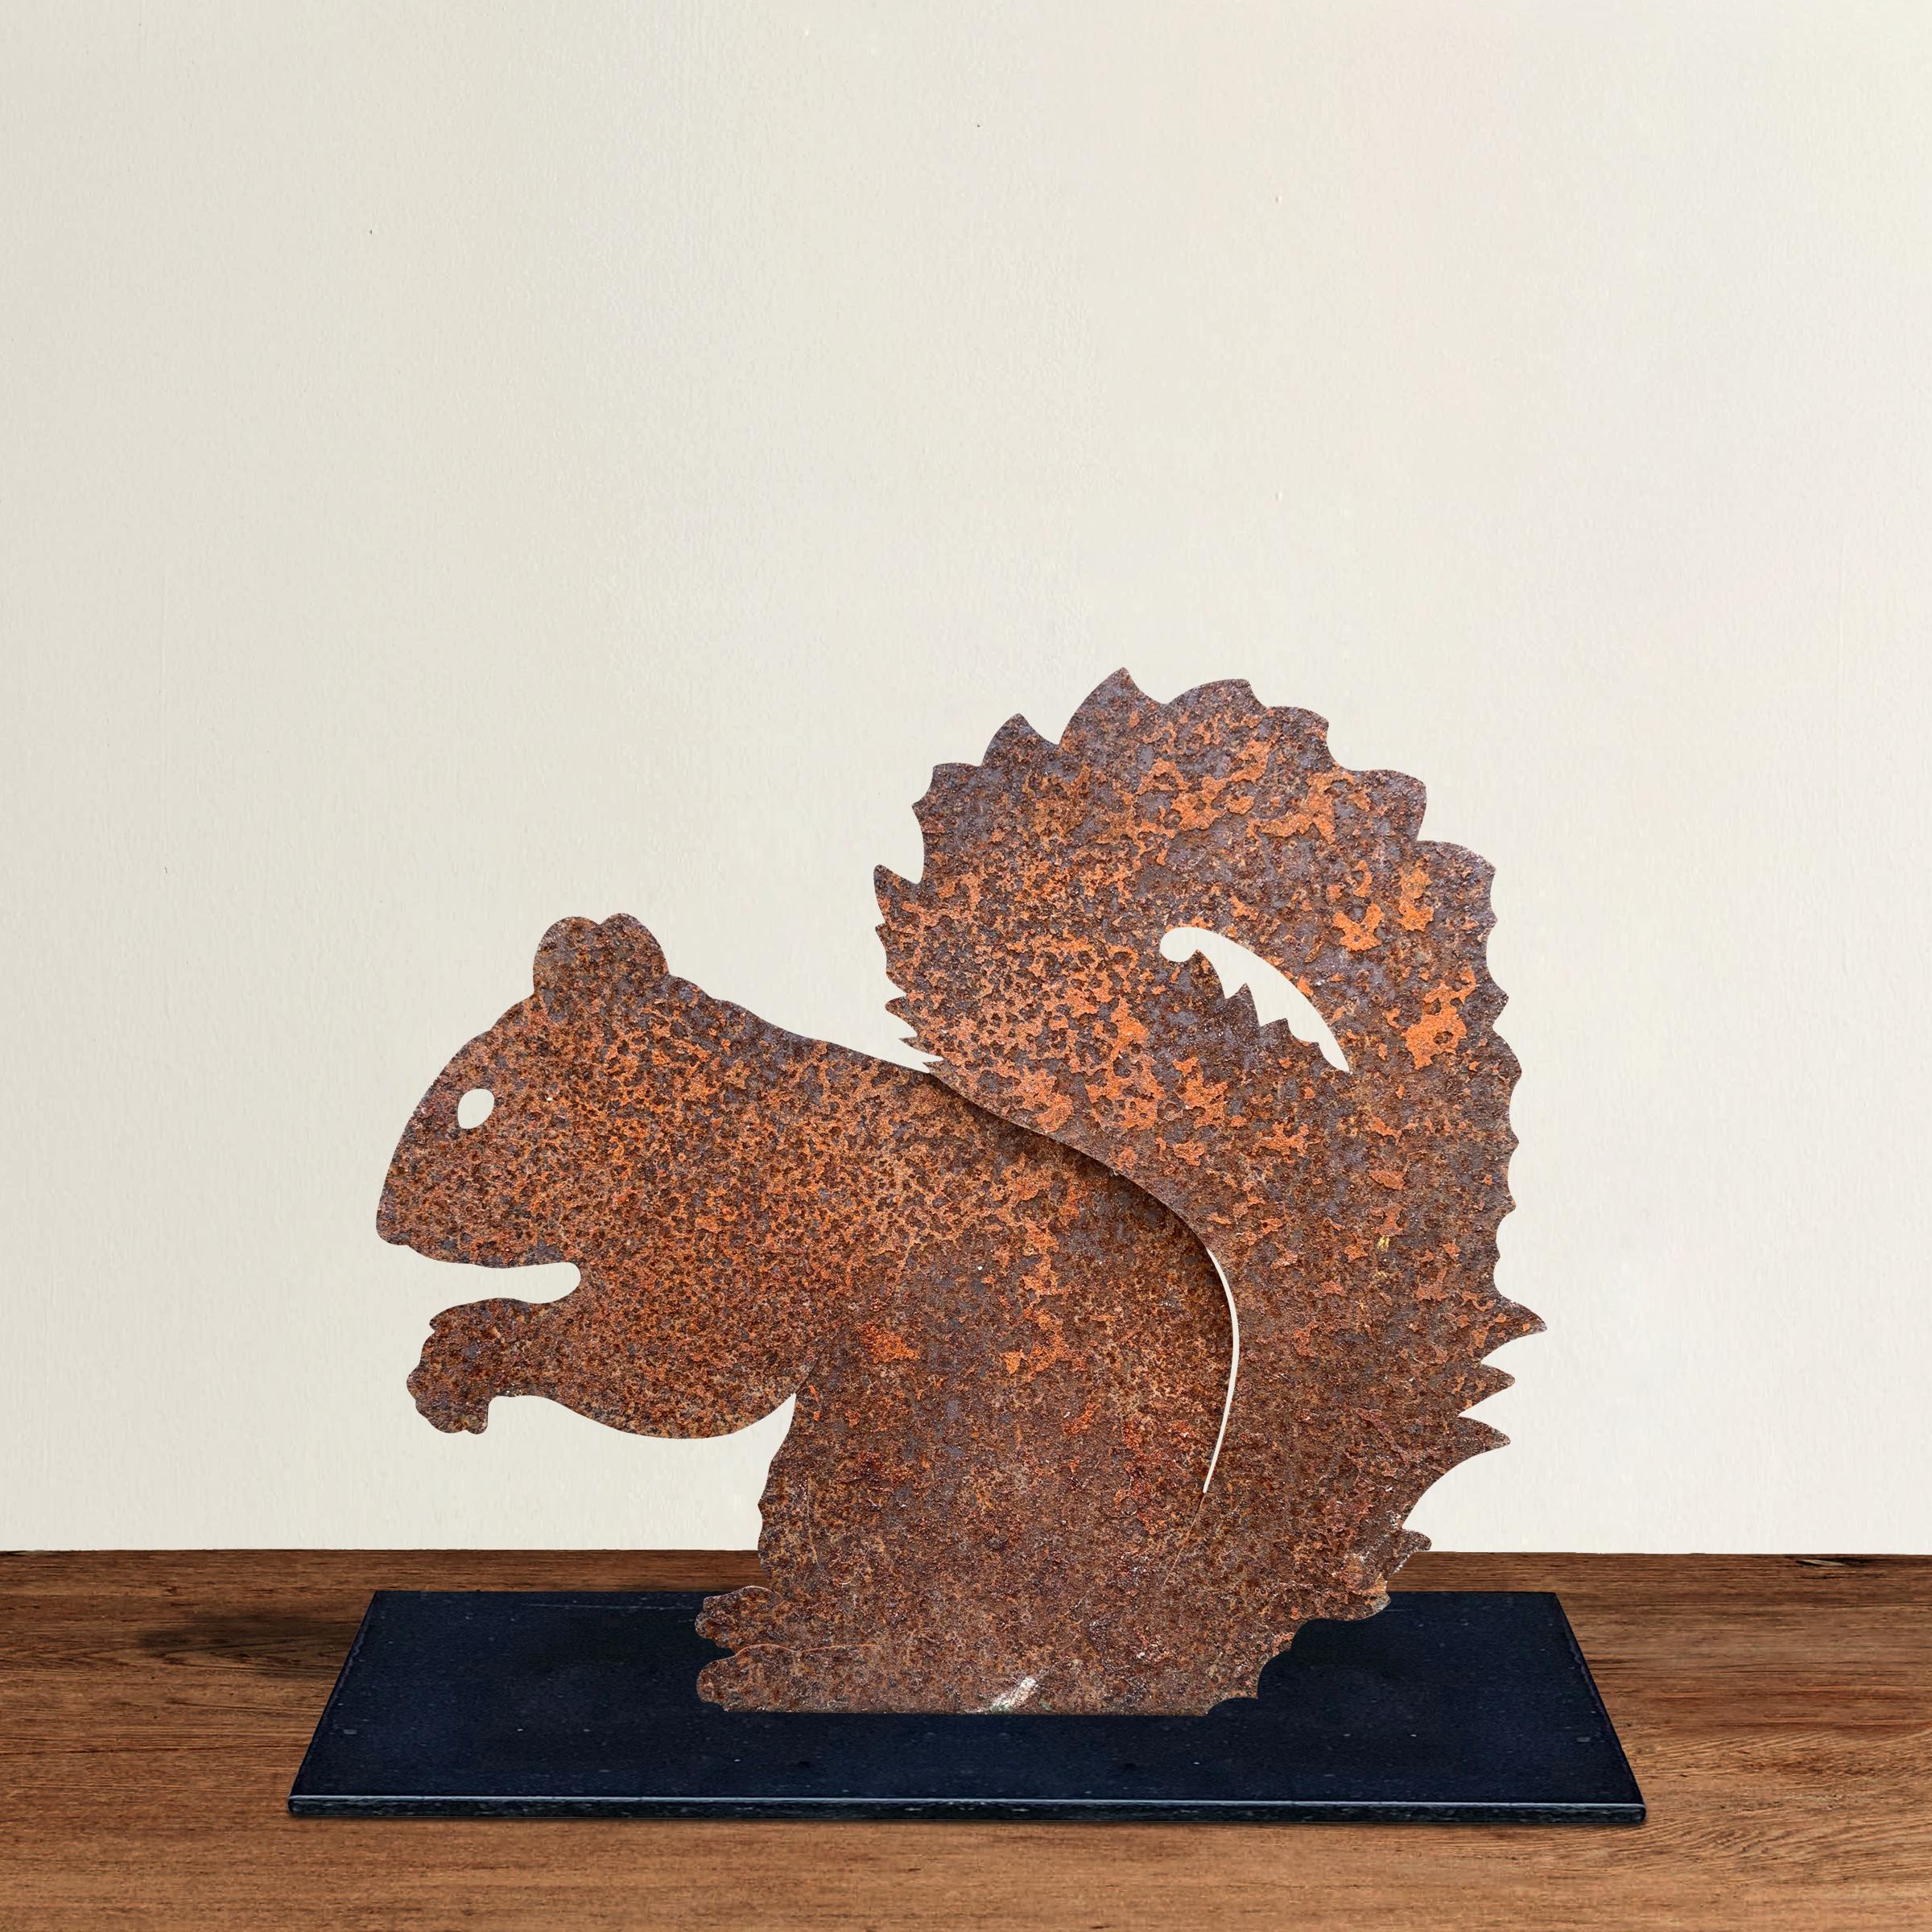 A wonderful and whimsical American folk art seated squirrel sculpture mounted on a custom steel base. Perfect for display indoors or out.